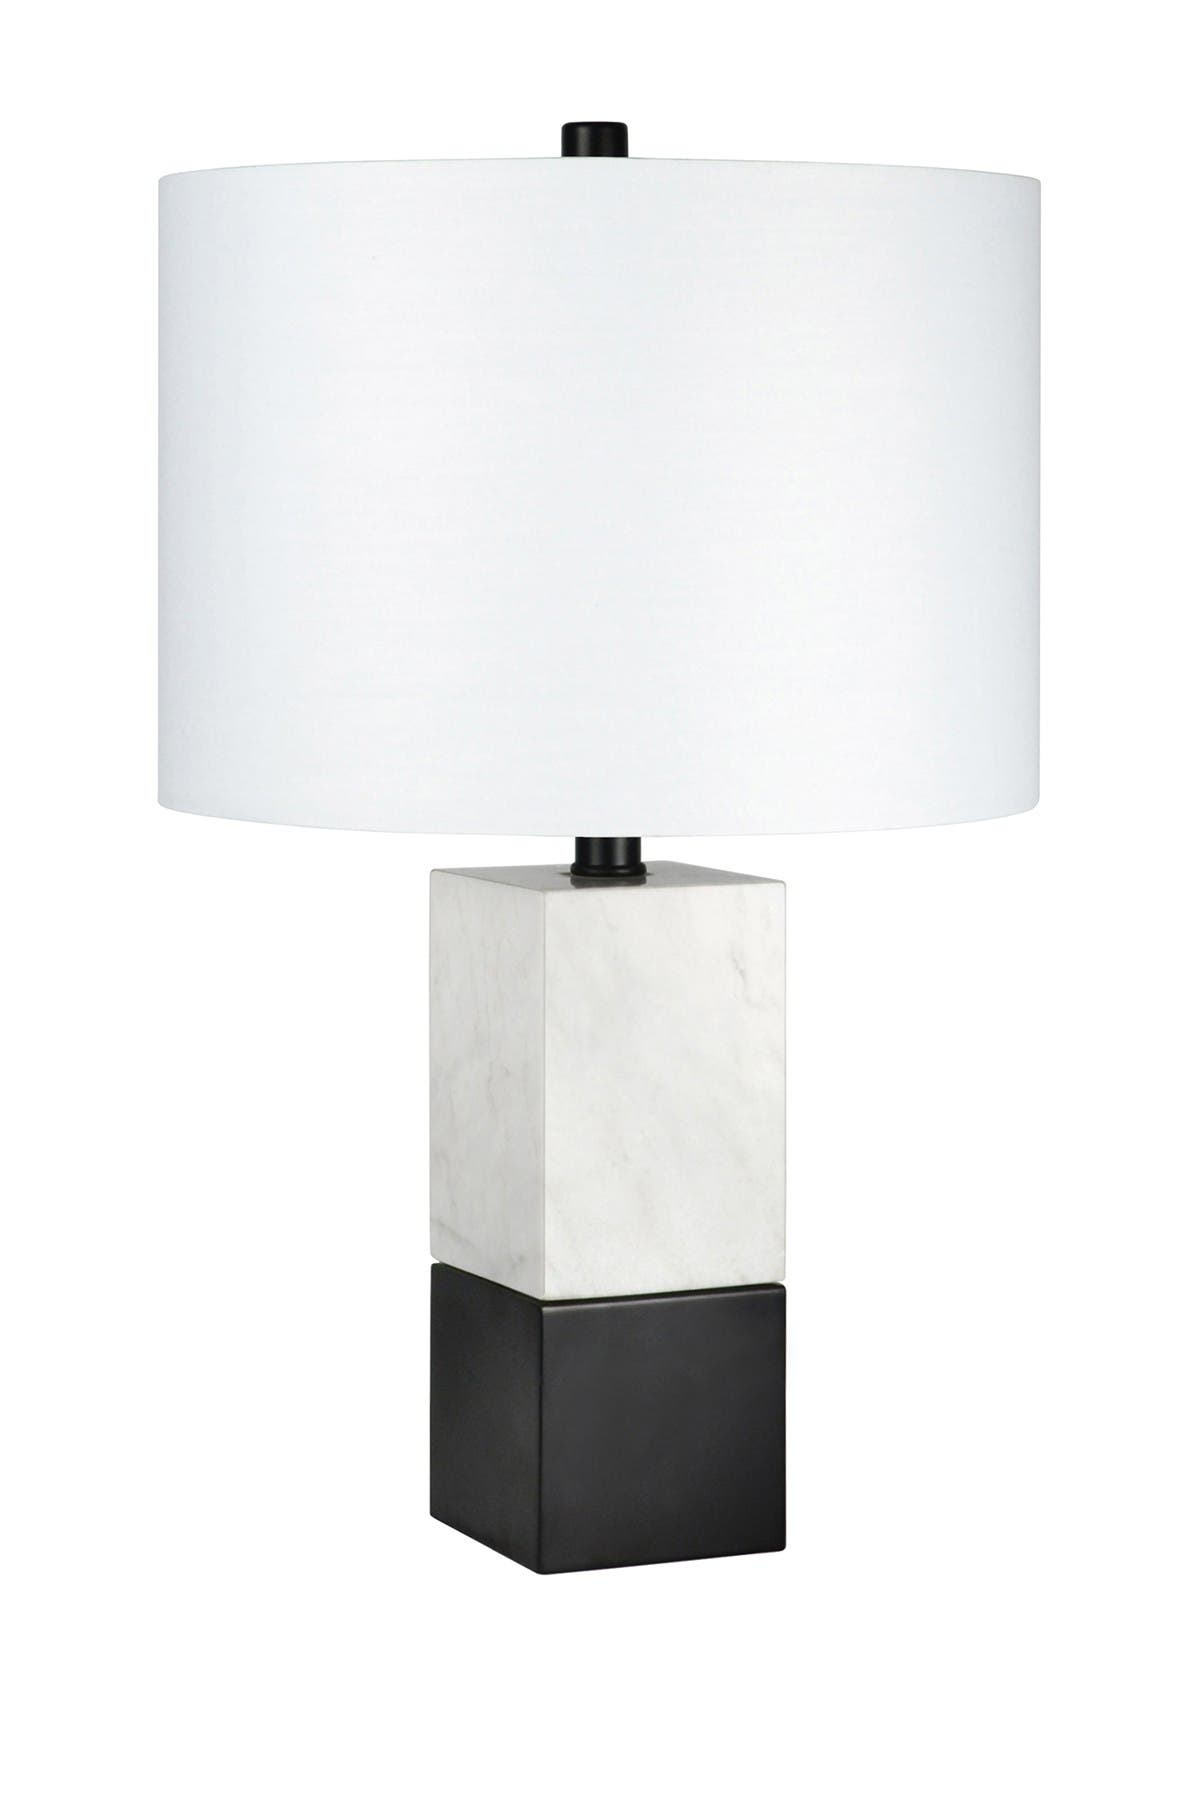 Addison And Lane Lena Cararra-style Marble And Blackened Bronze Table Lamp In Marble/black